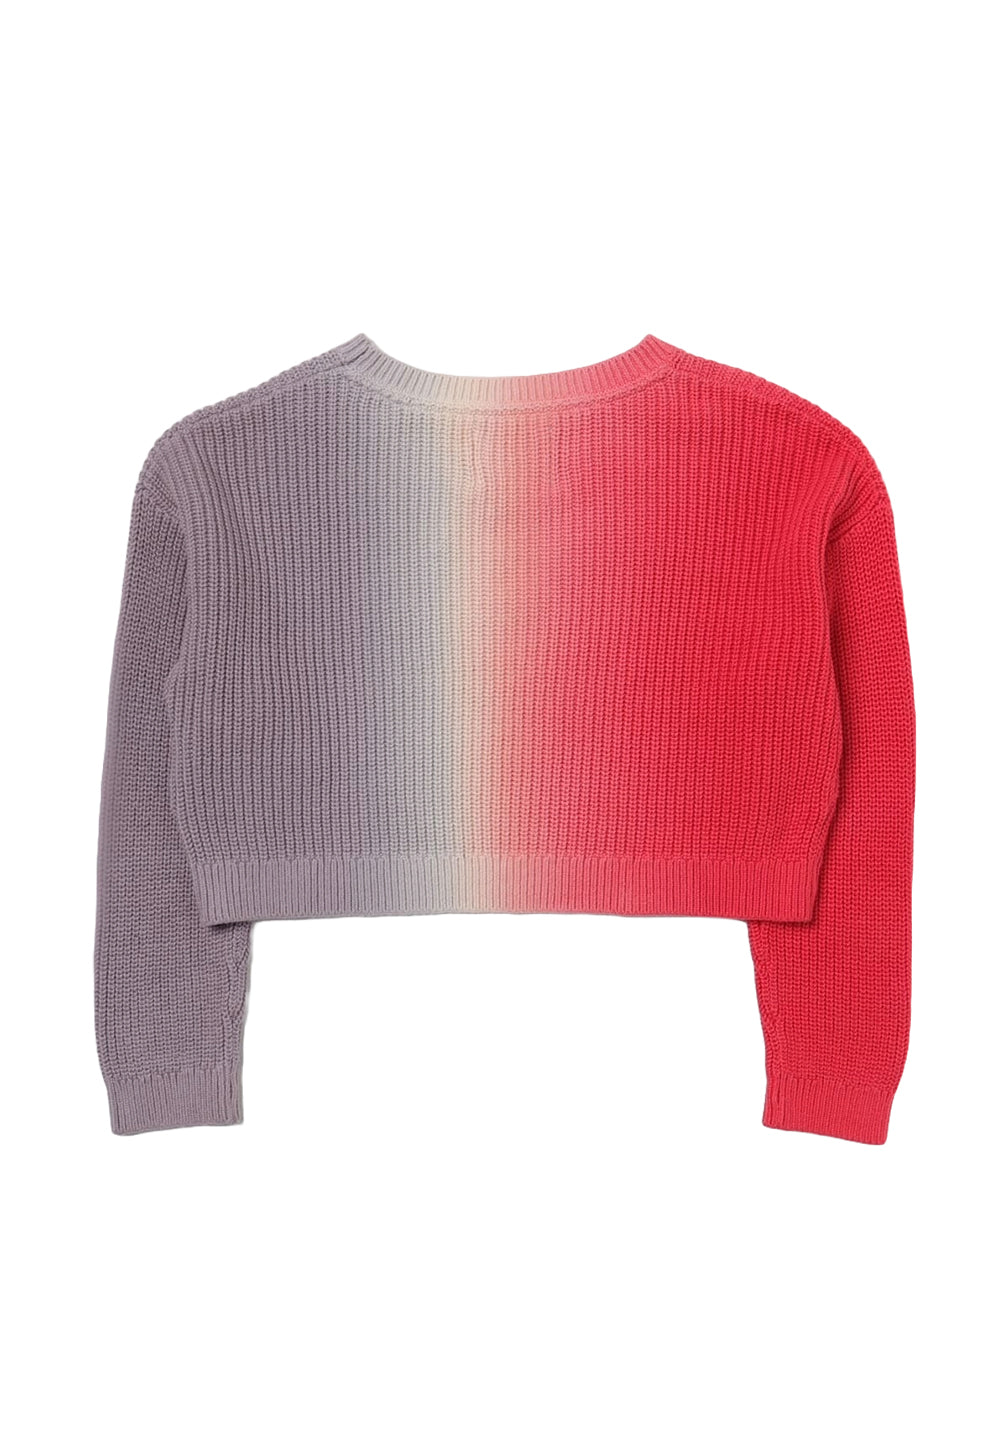 Multicolor sweater for girls